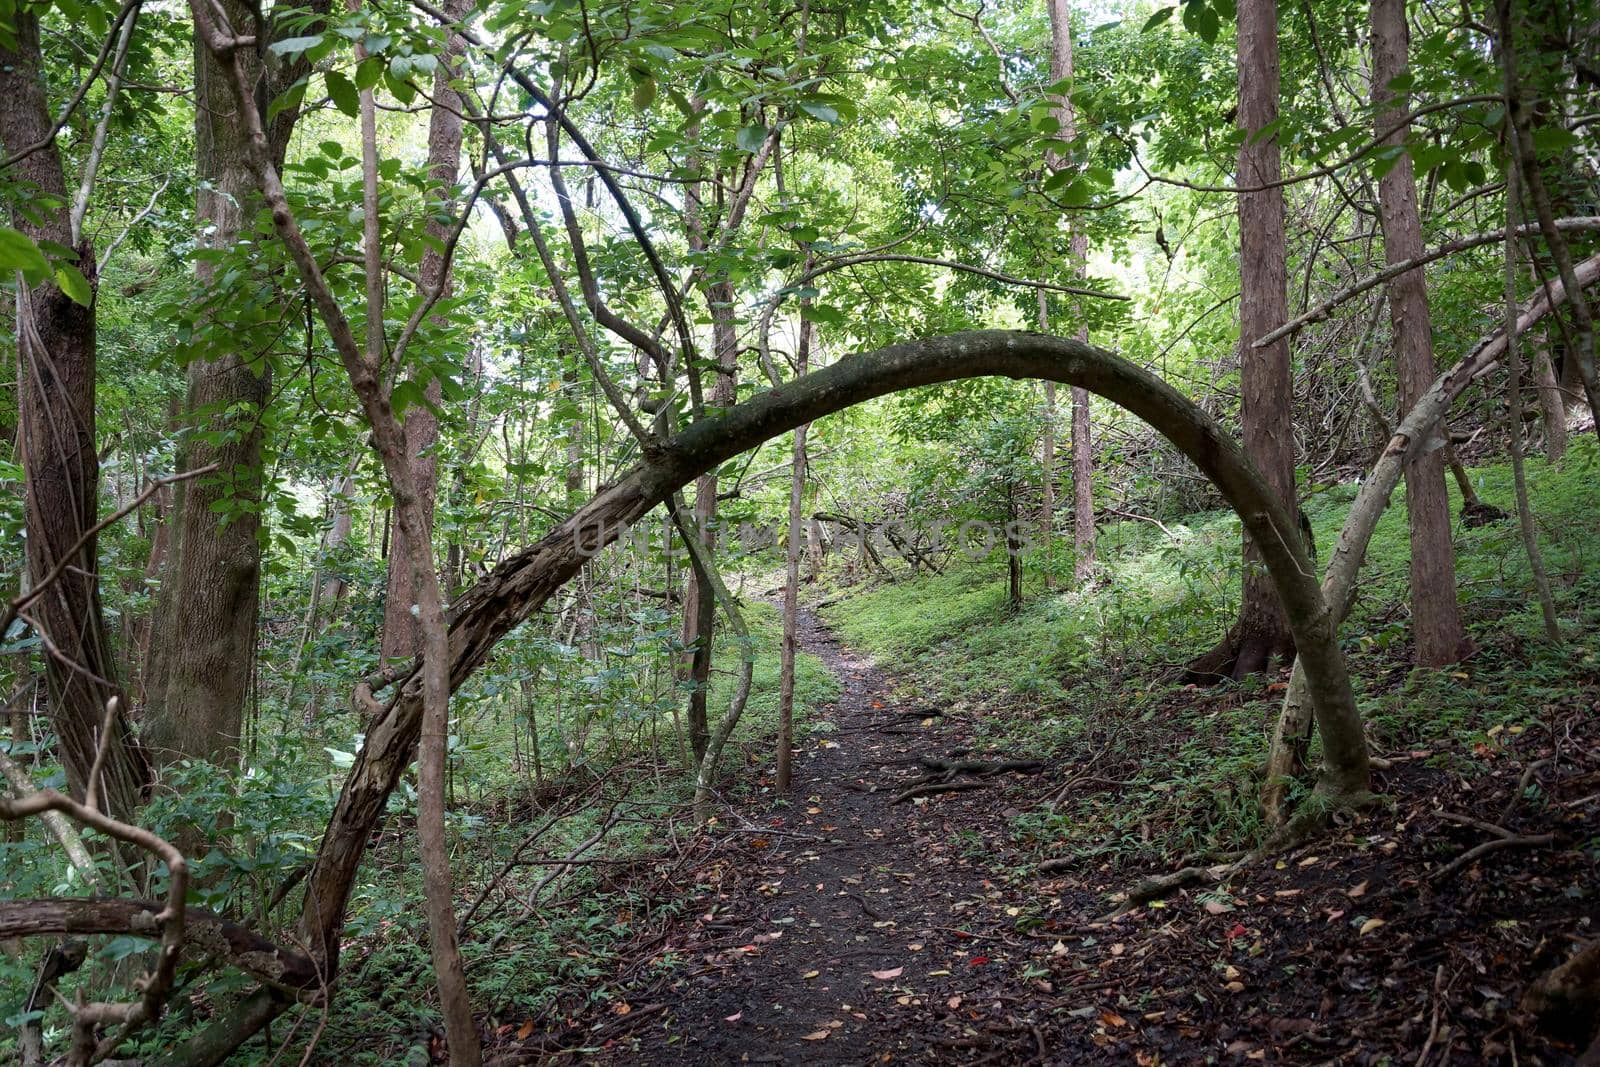 Tree bends over path leading upwards in on 'Ualaka'a Trail in tantalus forest on Oahu, Hawaii.